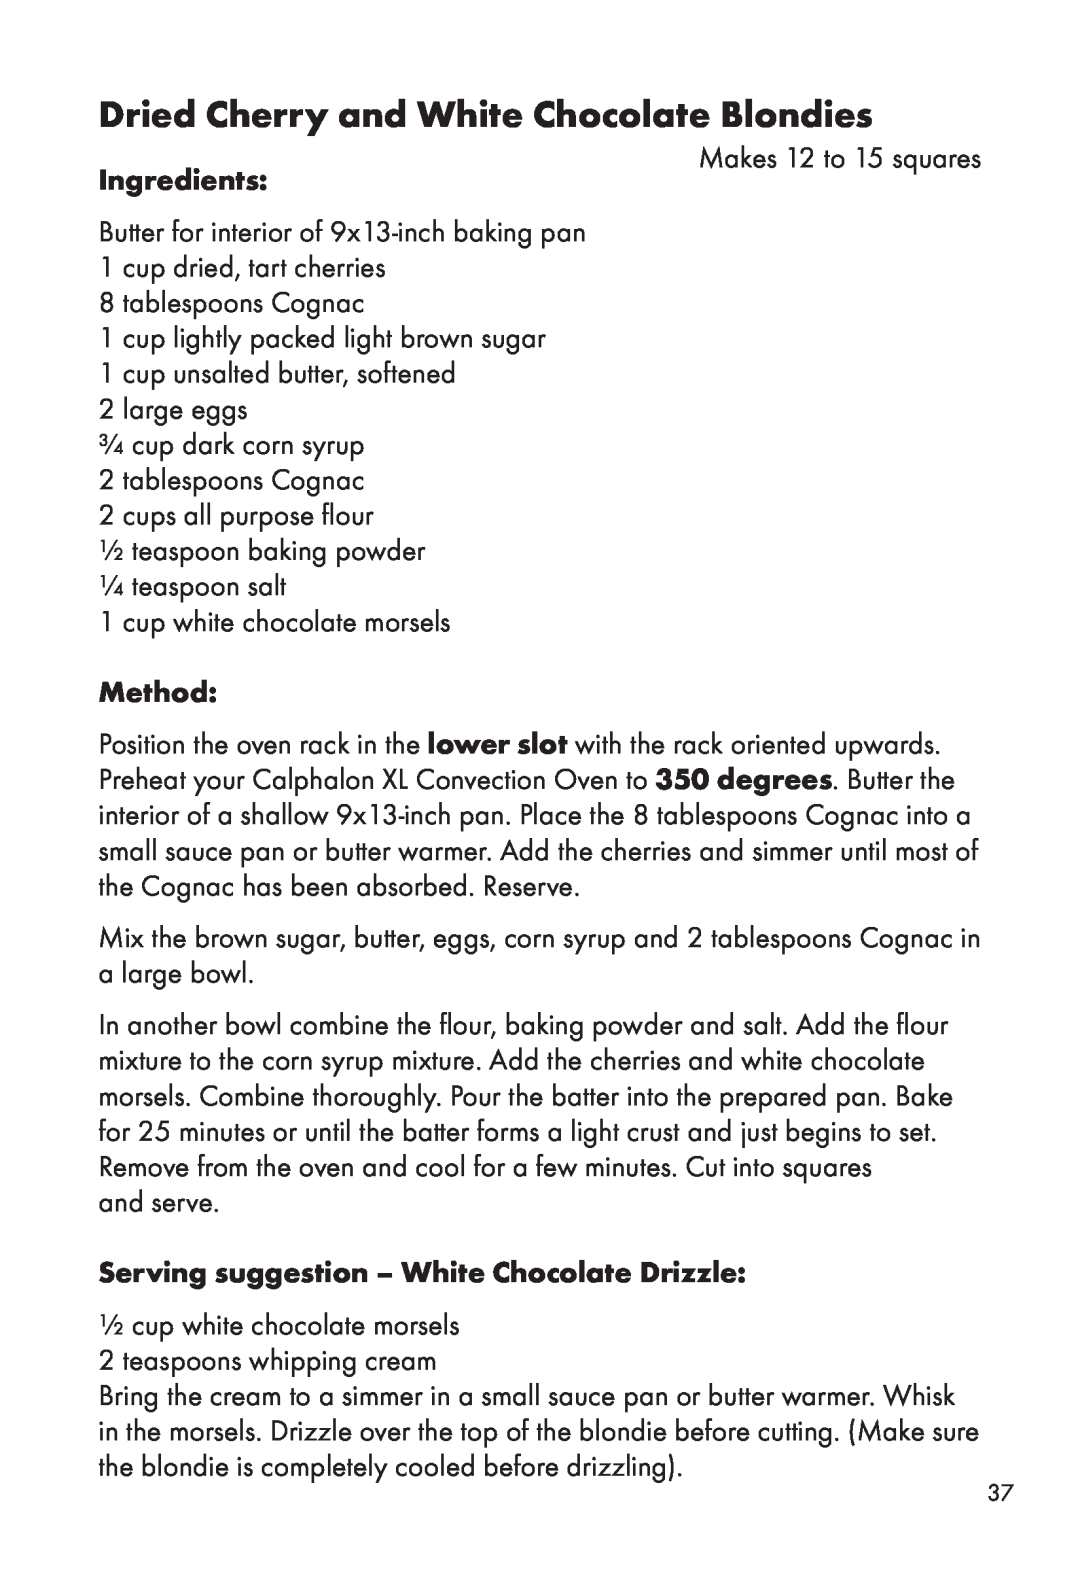 Calphalon HE700CO Dried Cherry and White Chocolate Blondies, Serving suggestion - White Chocolate Drizzle, Ingredients 